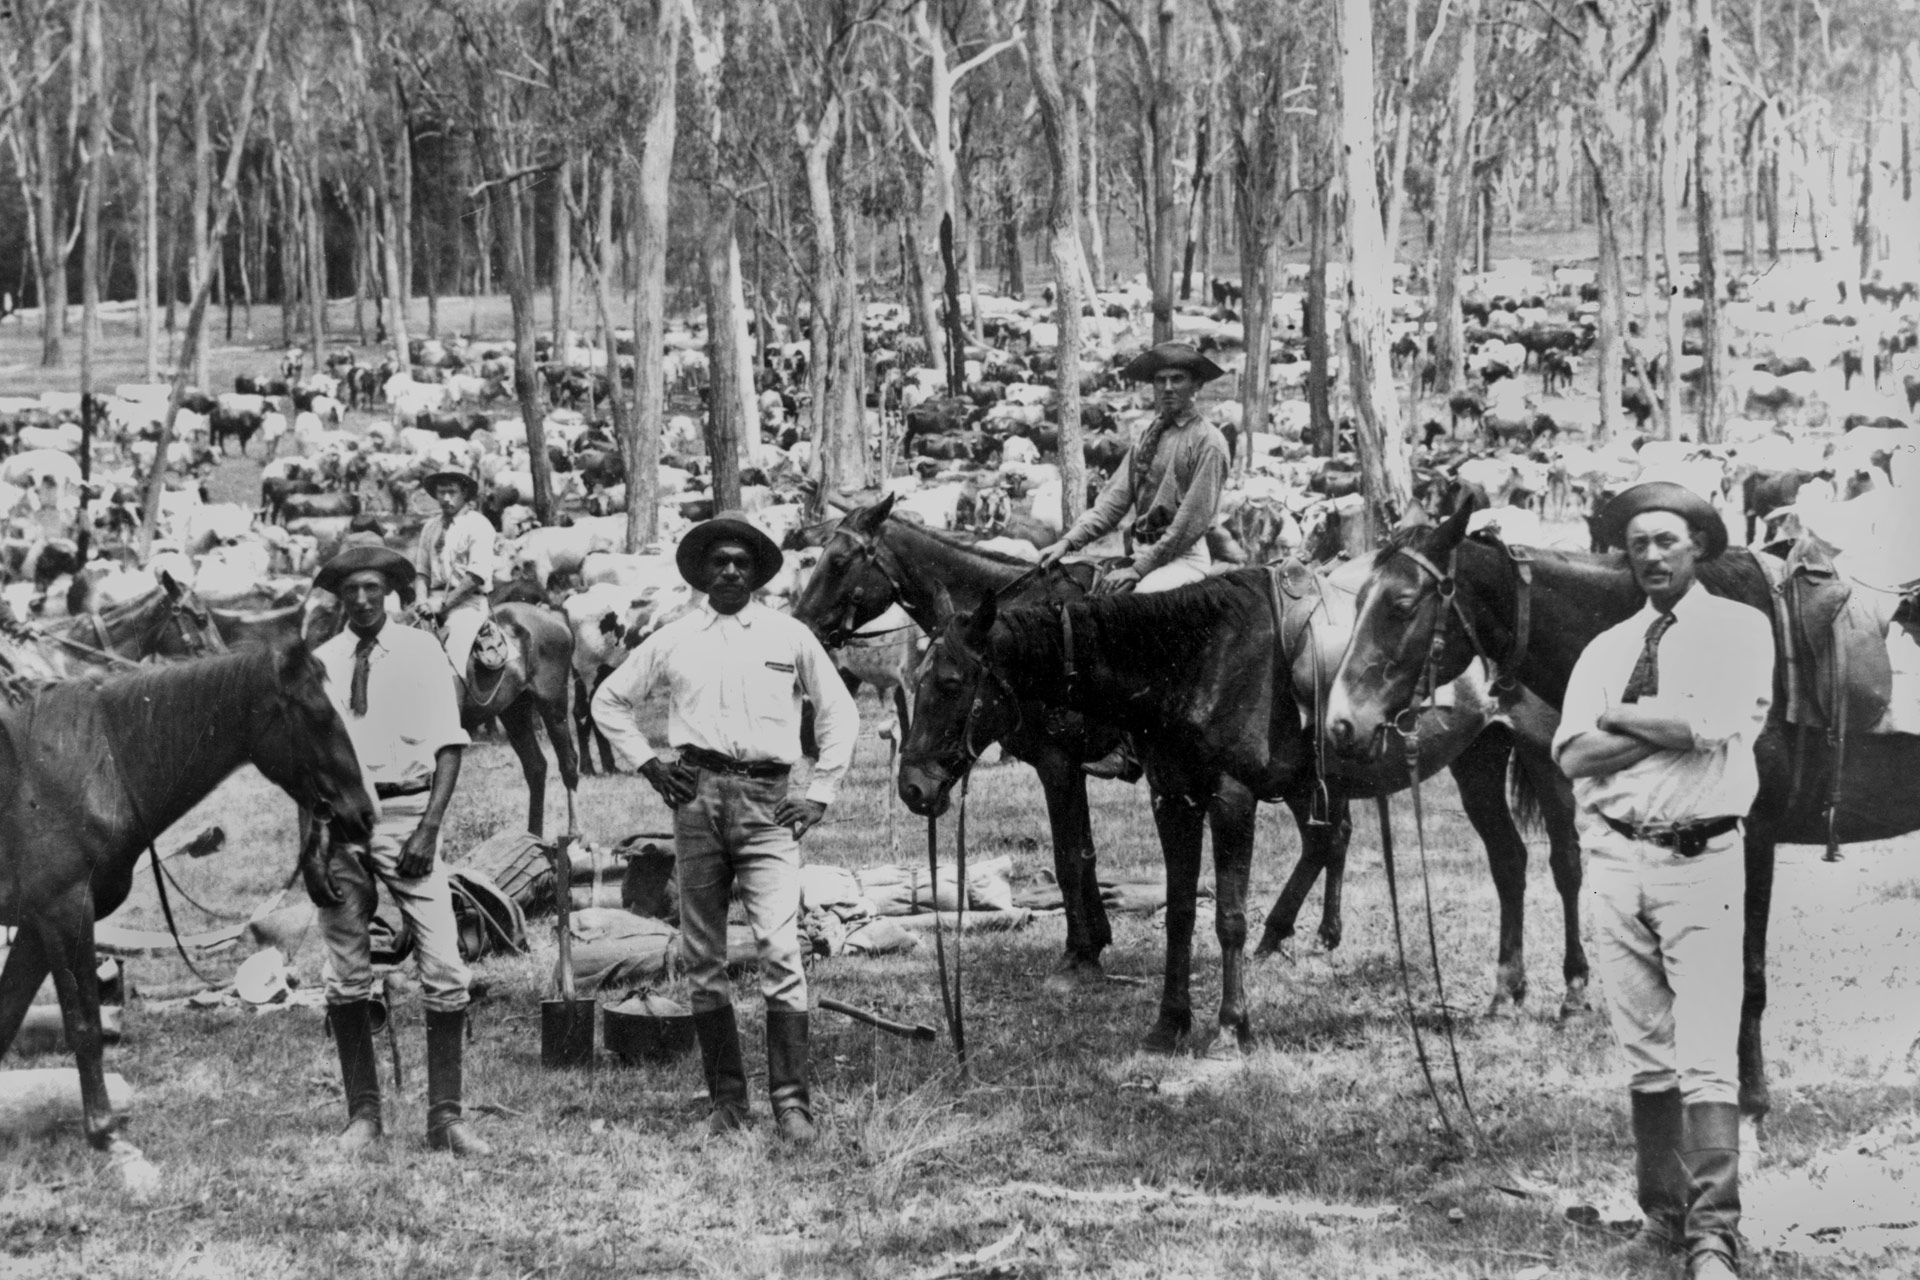 Drovers pose with their horses while camping equipment lays strewn on the ground. The cattle are herded amongst the trees in the background.